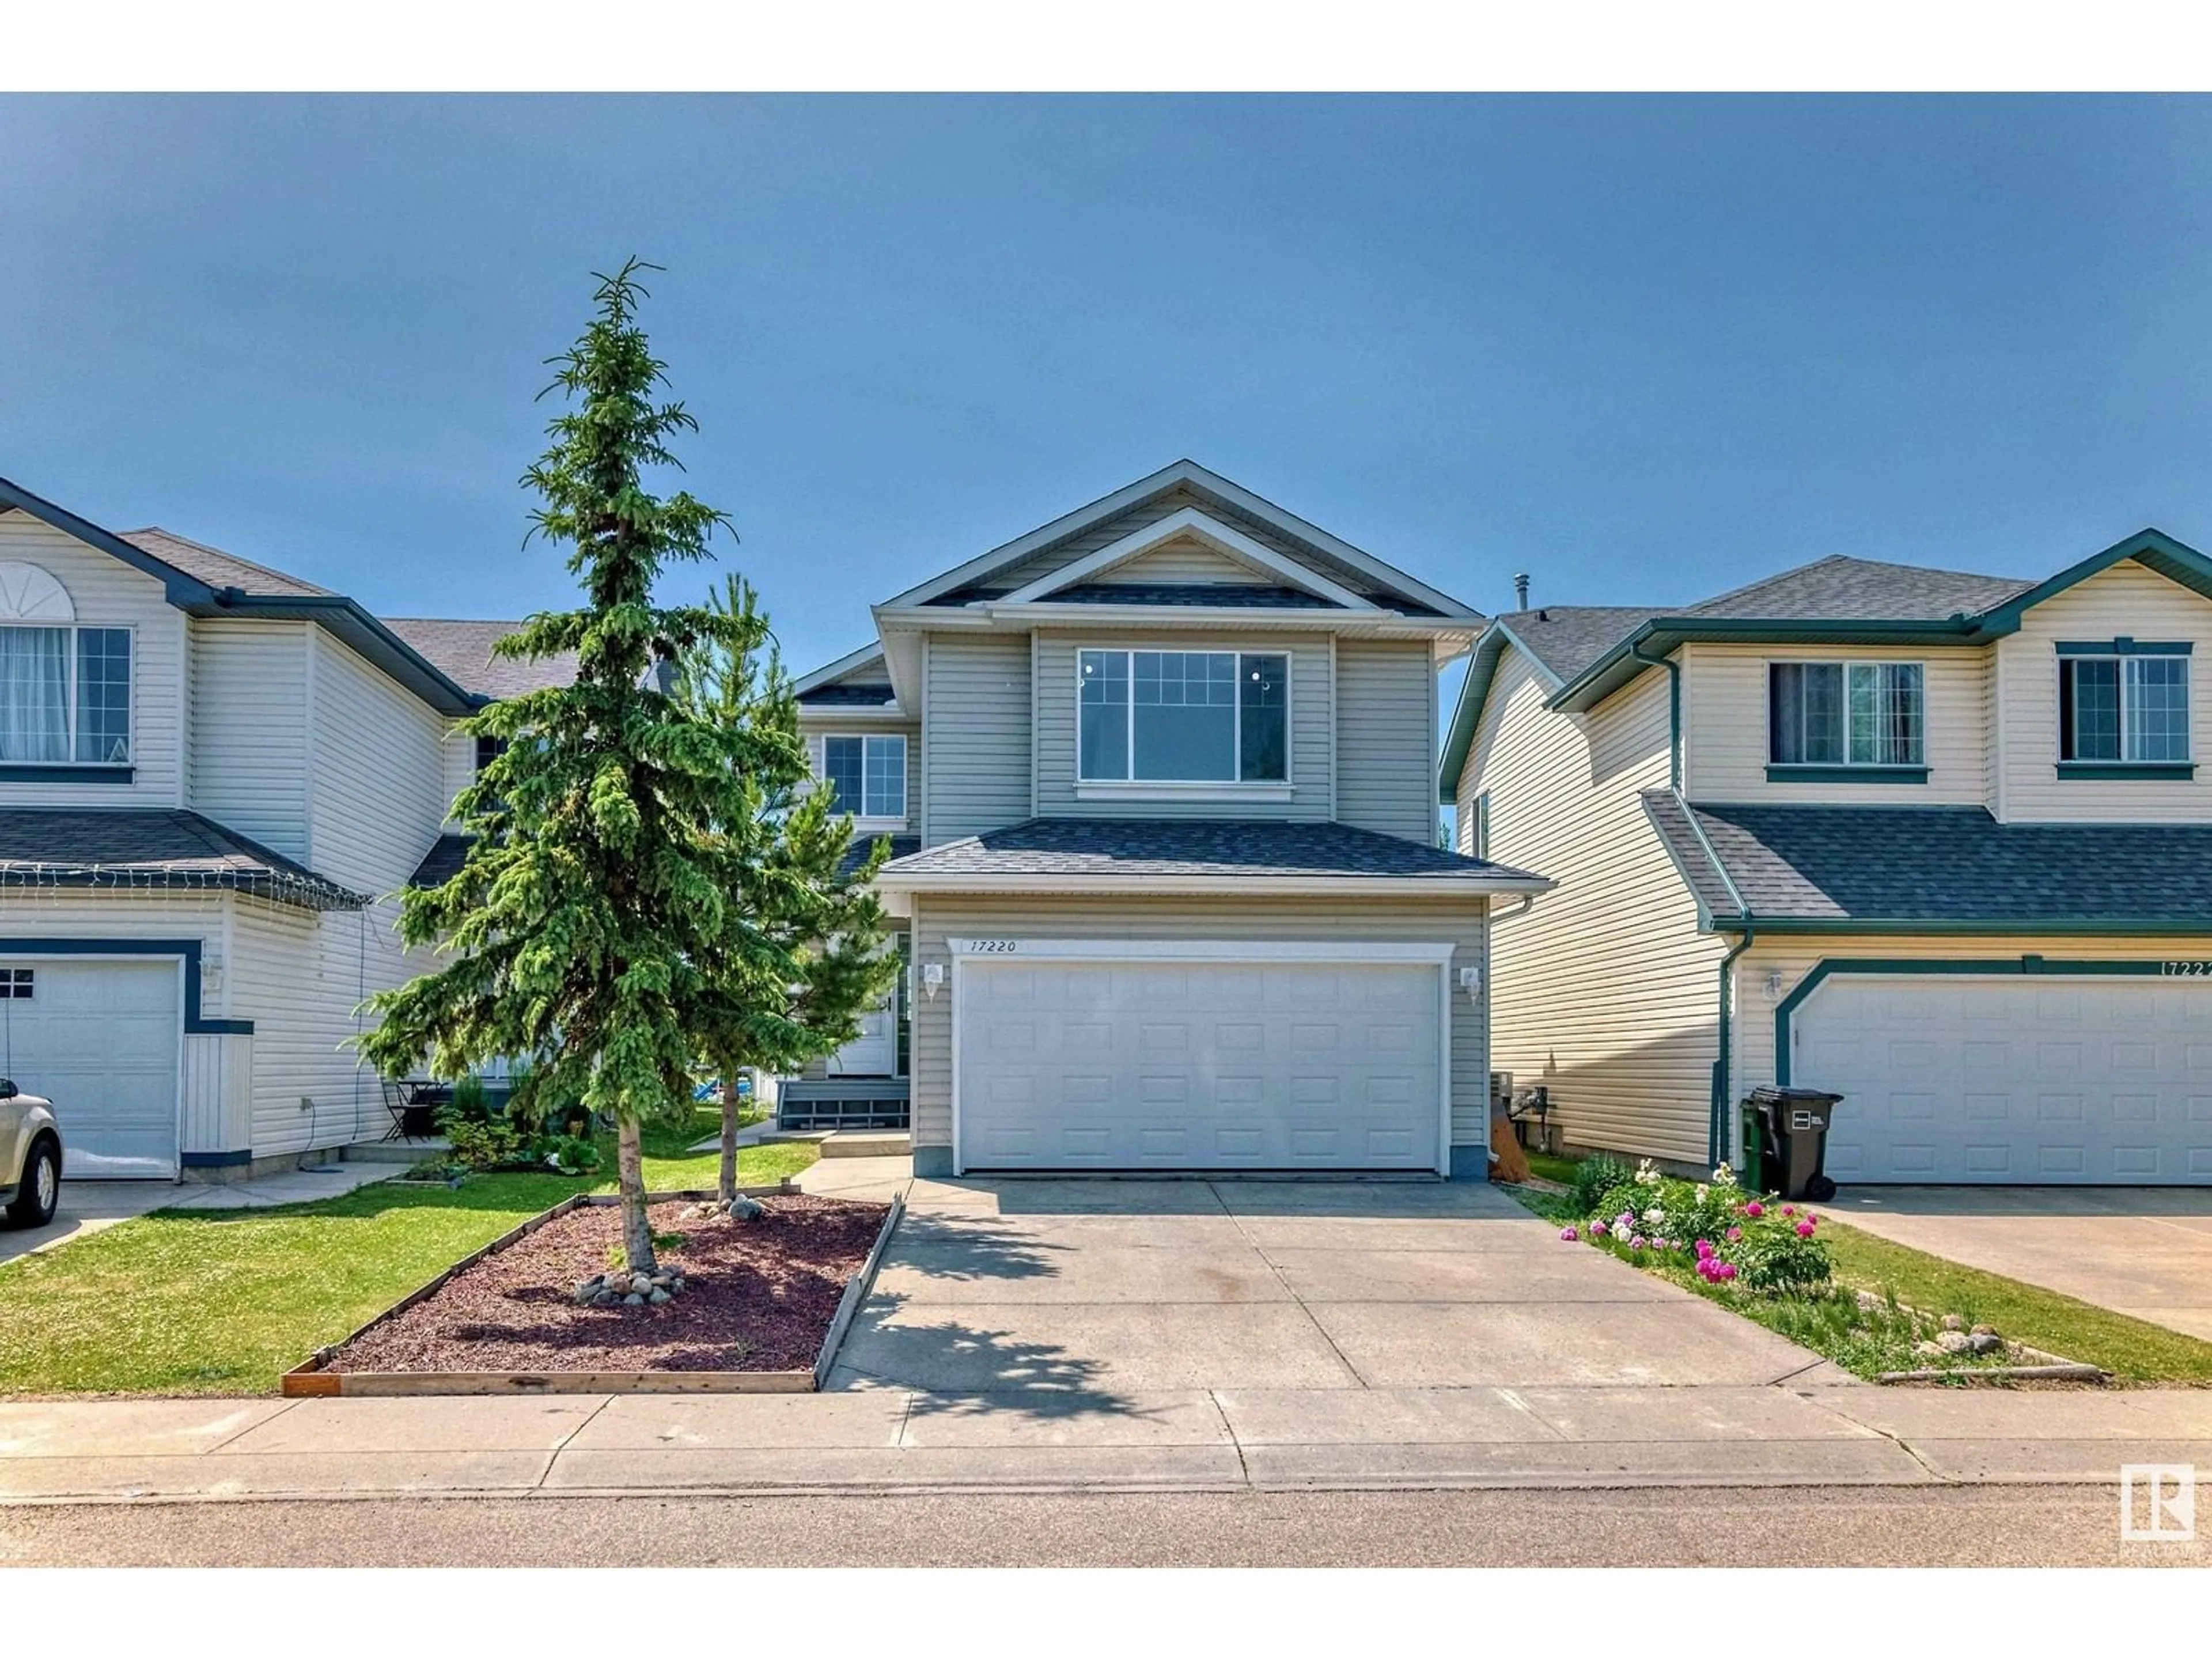 A pic from exterior of the house or condo for 17220 88 ST NW, Edmonton Alberta T5Z3R5